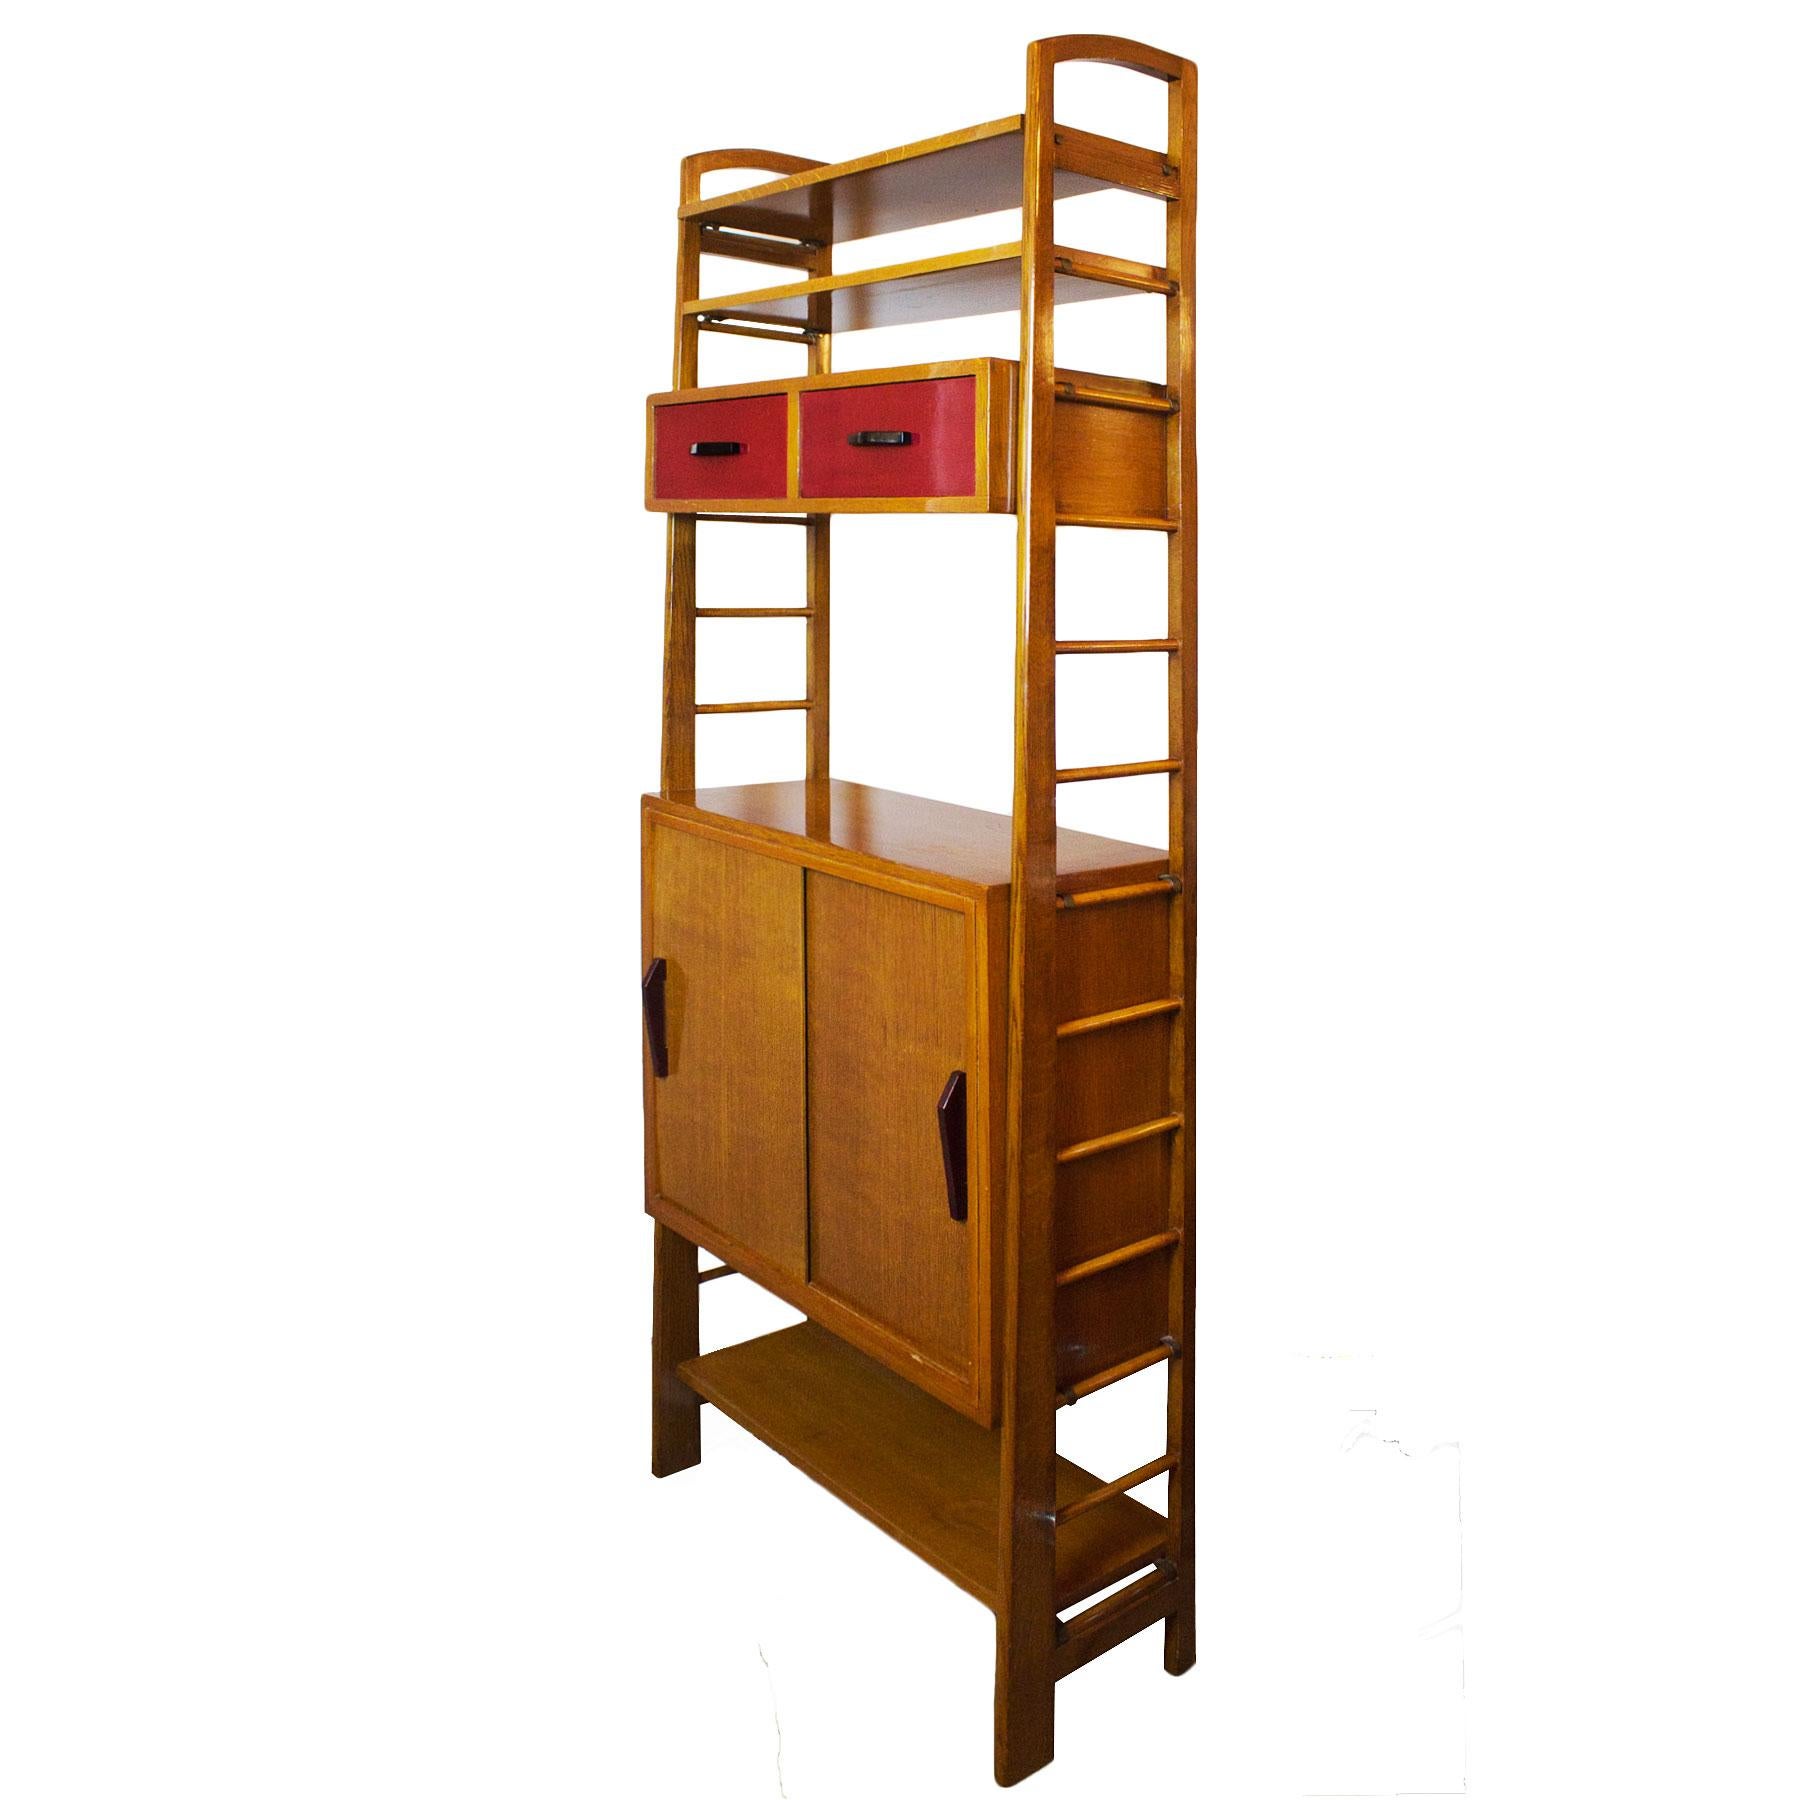 Oak modulus storage cabinet with red lacquered drawers, sliding doors and shelves.

France, circa 1950.